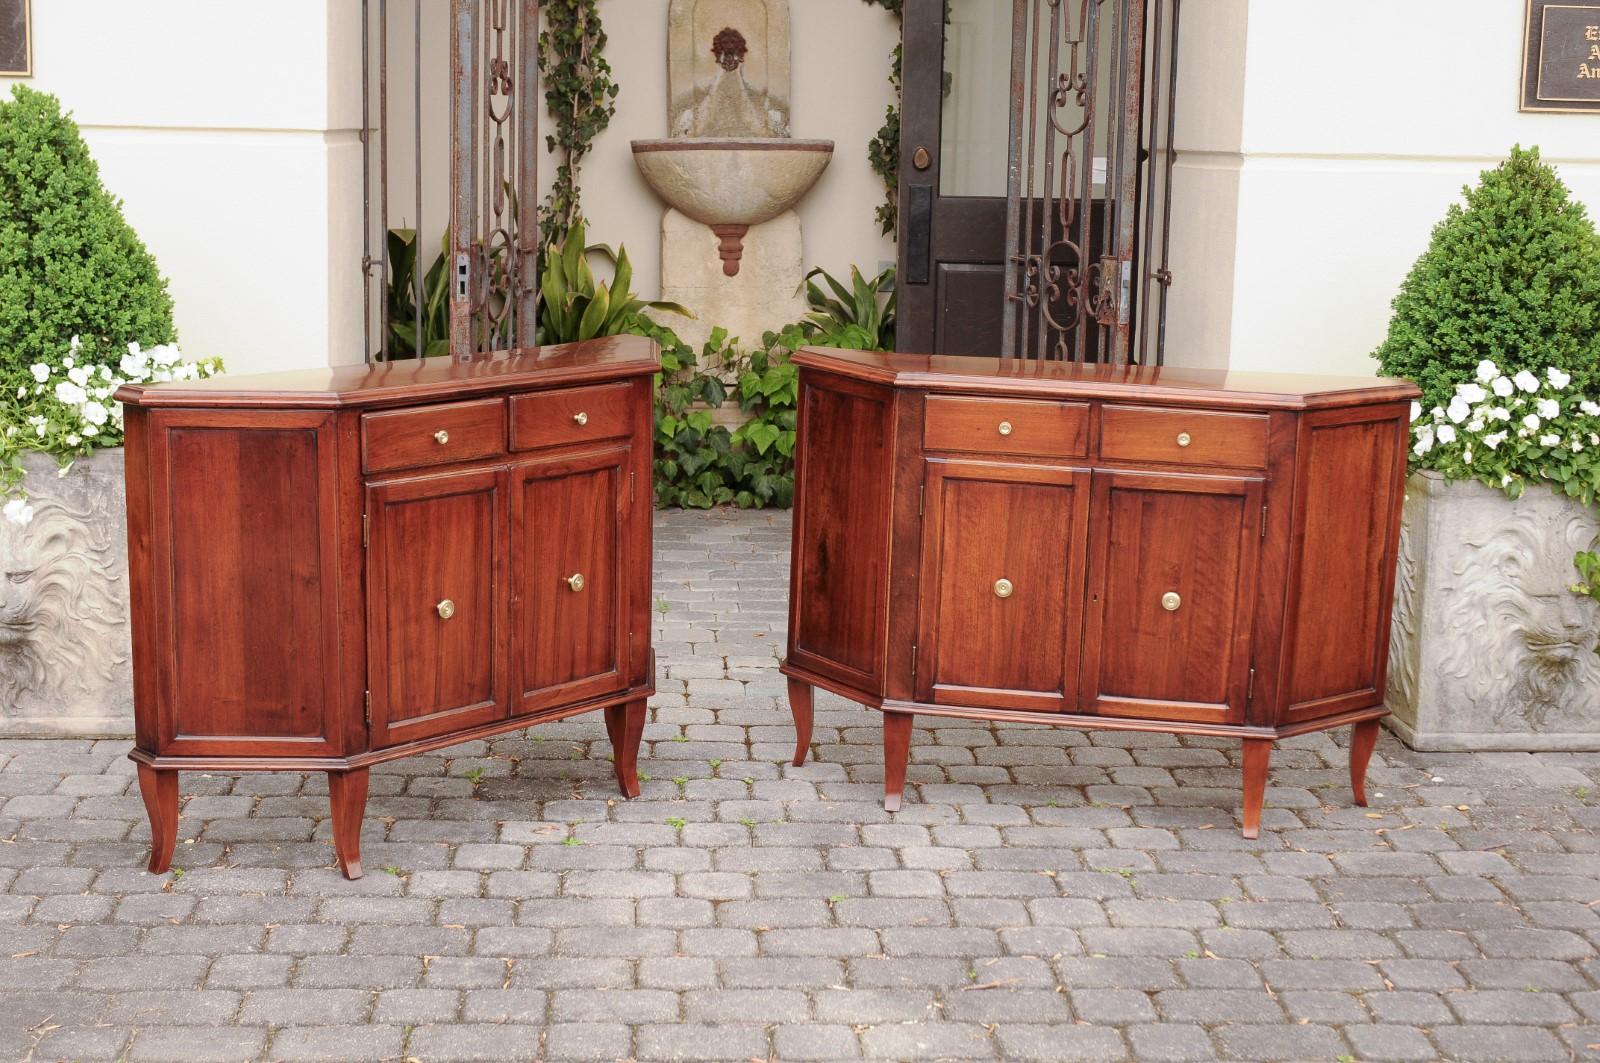 A pair of Italian walnut credenzas from the late 19th century, with canted sides and two drawers over double doors. Born in Italian during the third quarter of the 19th century, each of this pair of elegant walnut credenzas features a polygonal top